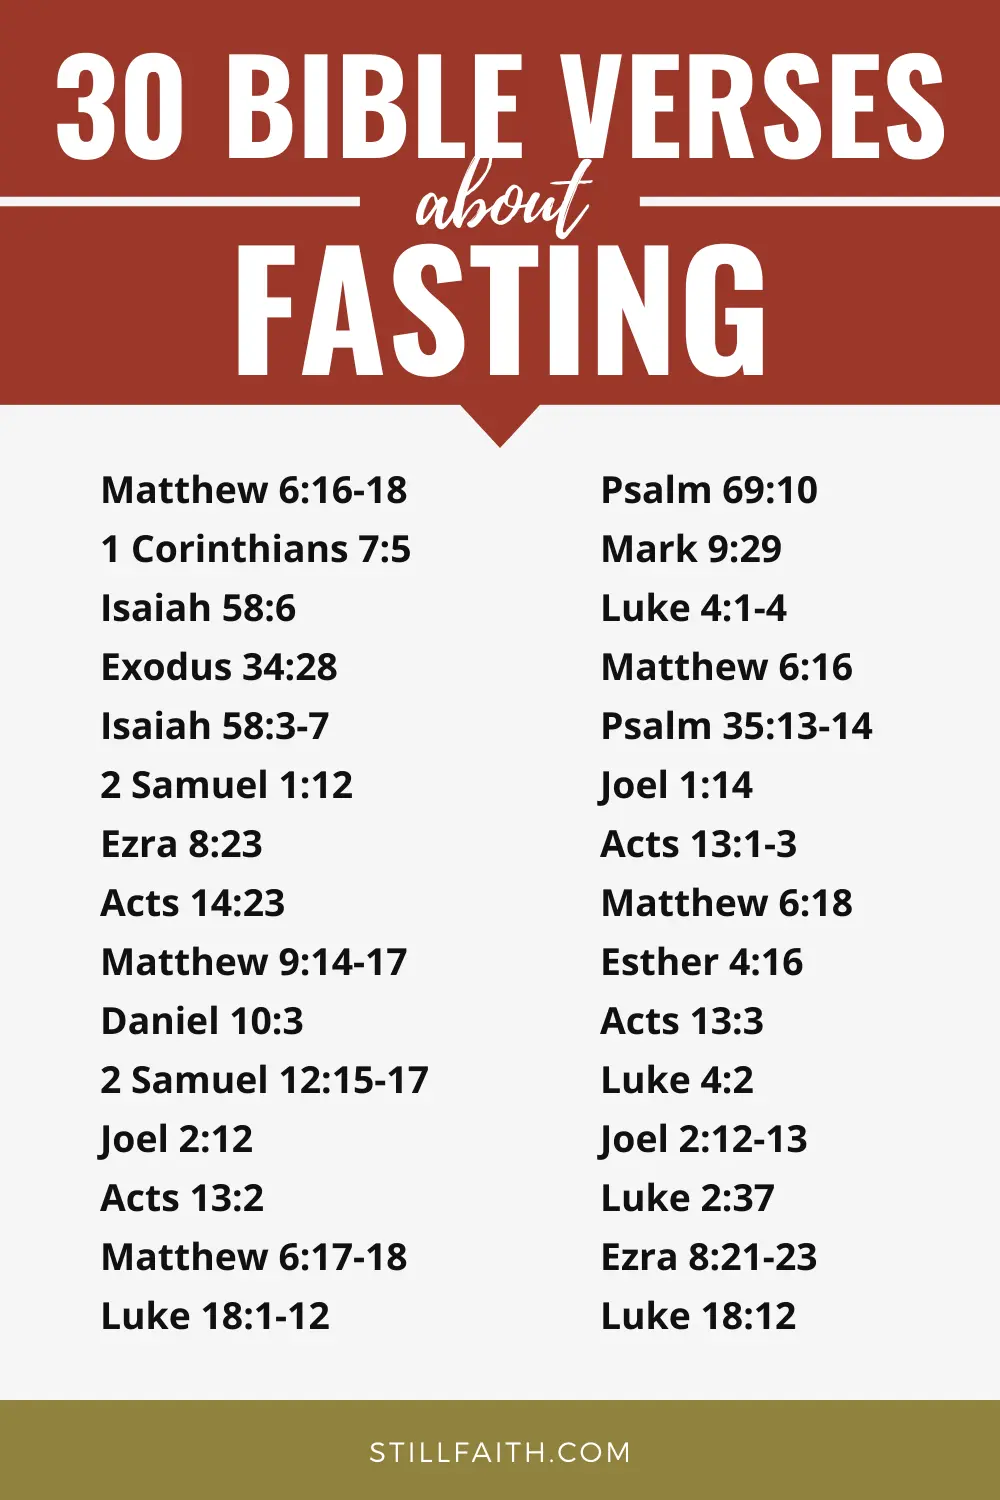 Bible Verses about Fasting